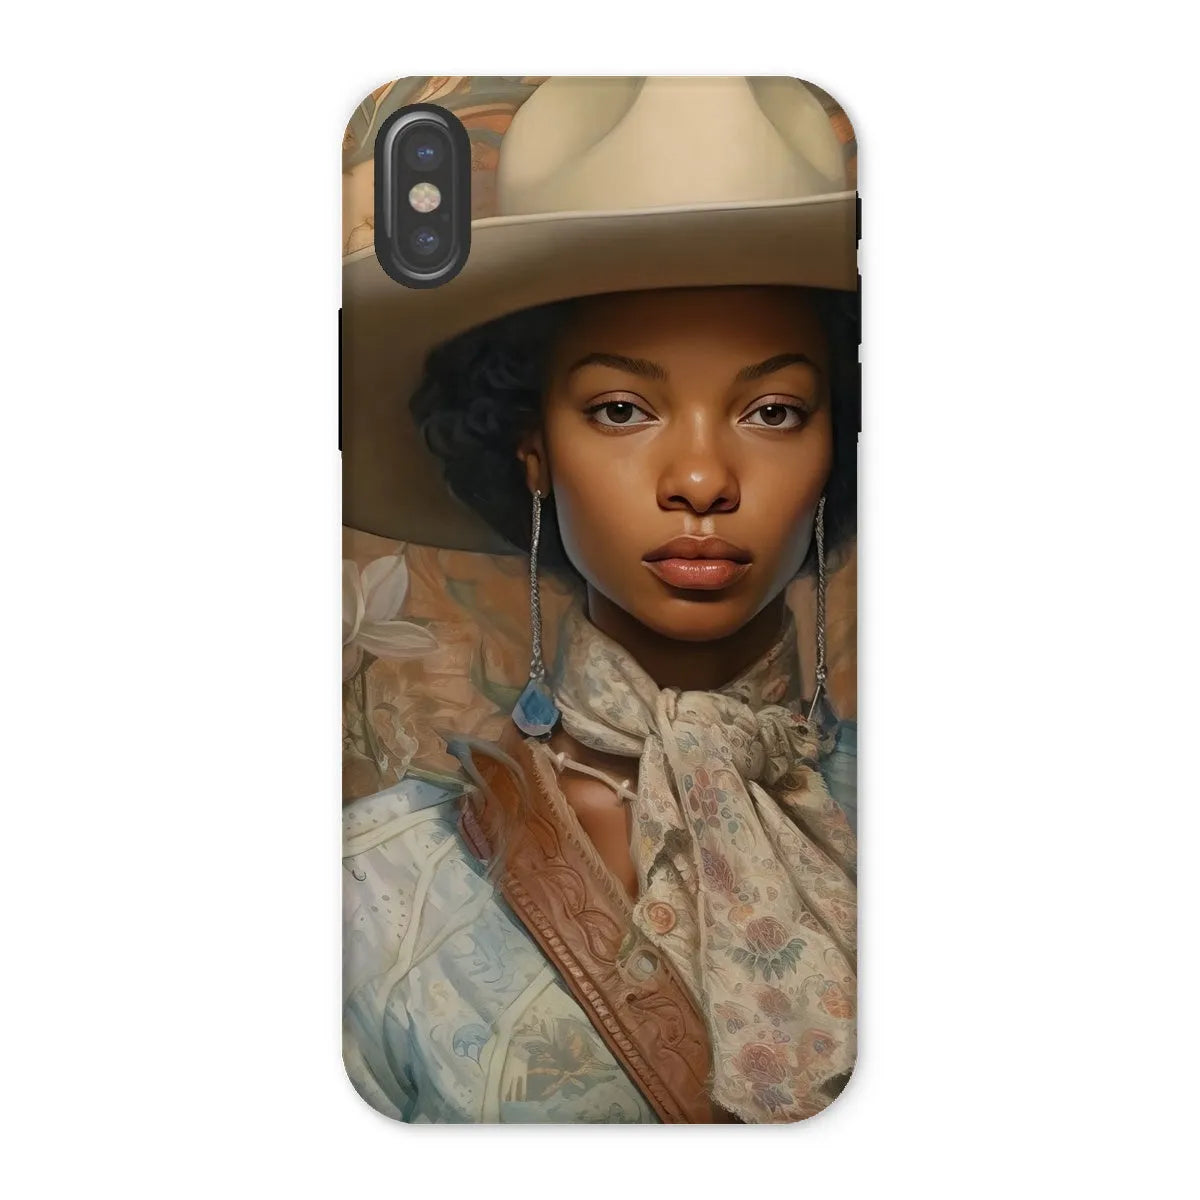 Imani The Lesbian Cowgirl - Sapphic Art Phone Case - Iphone x / Matte - Mobile Phone Cases - Aesthetic Art